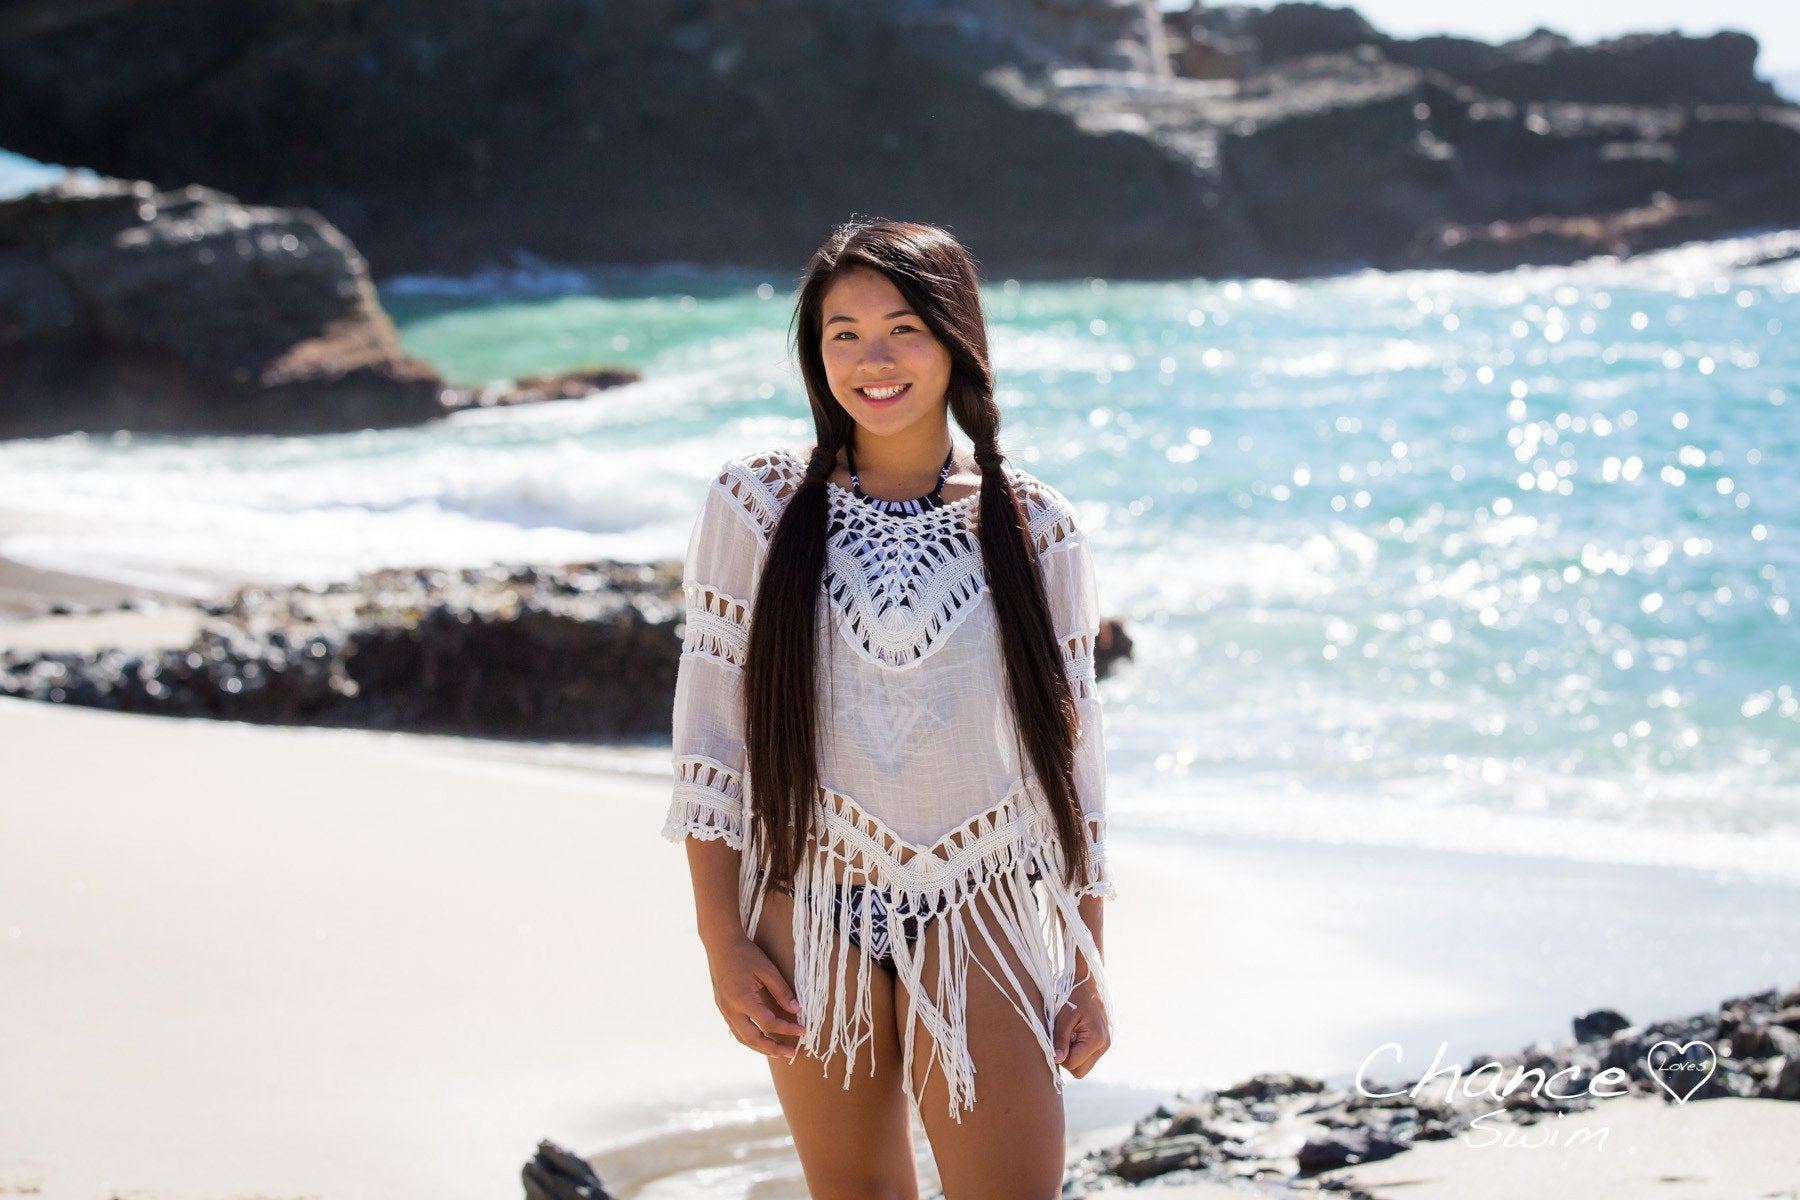 By the seashore in the Chance Loves Chenoa Blouse - Chance Loves Swimwear